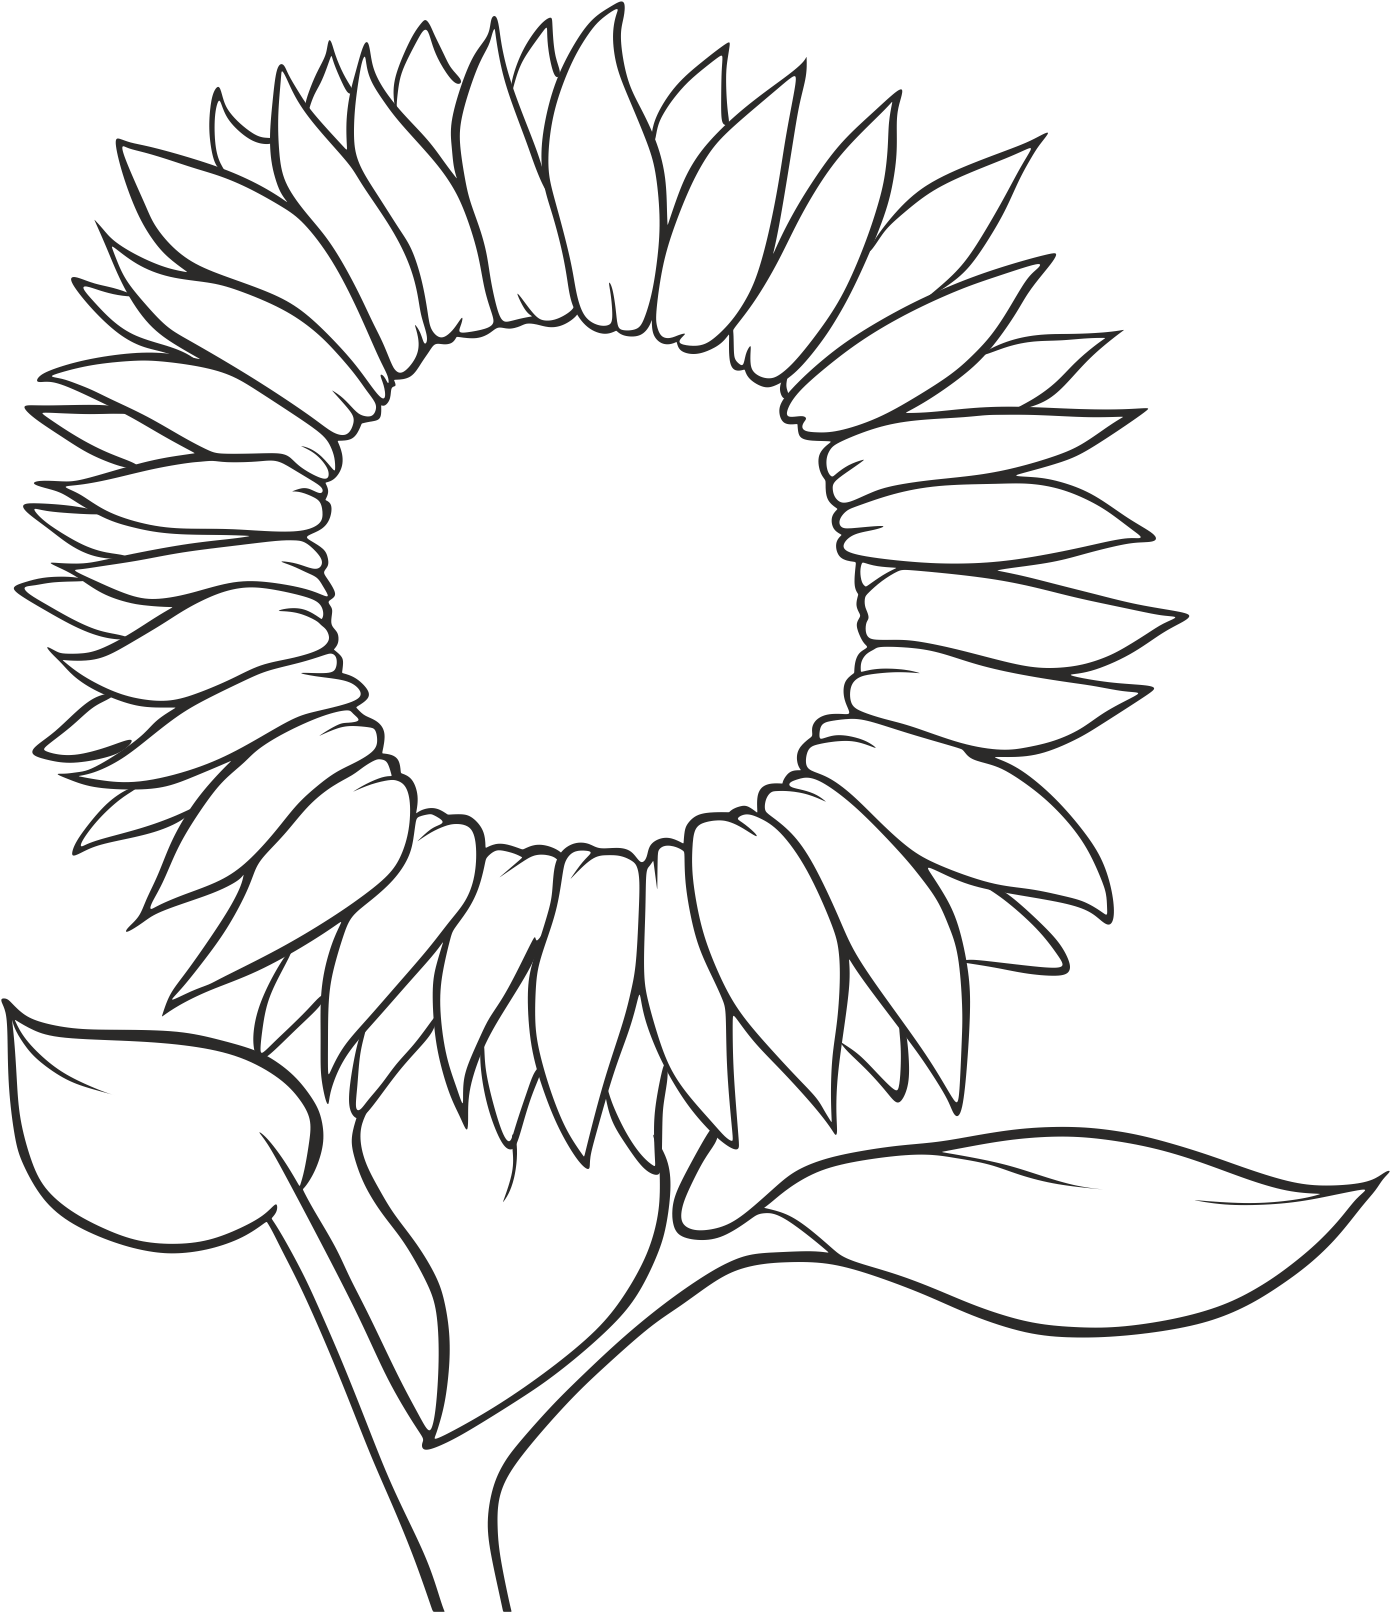 Download Common Seed Sketch - Free Line Drawing Sunflower.